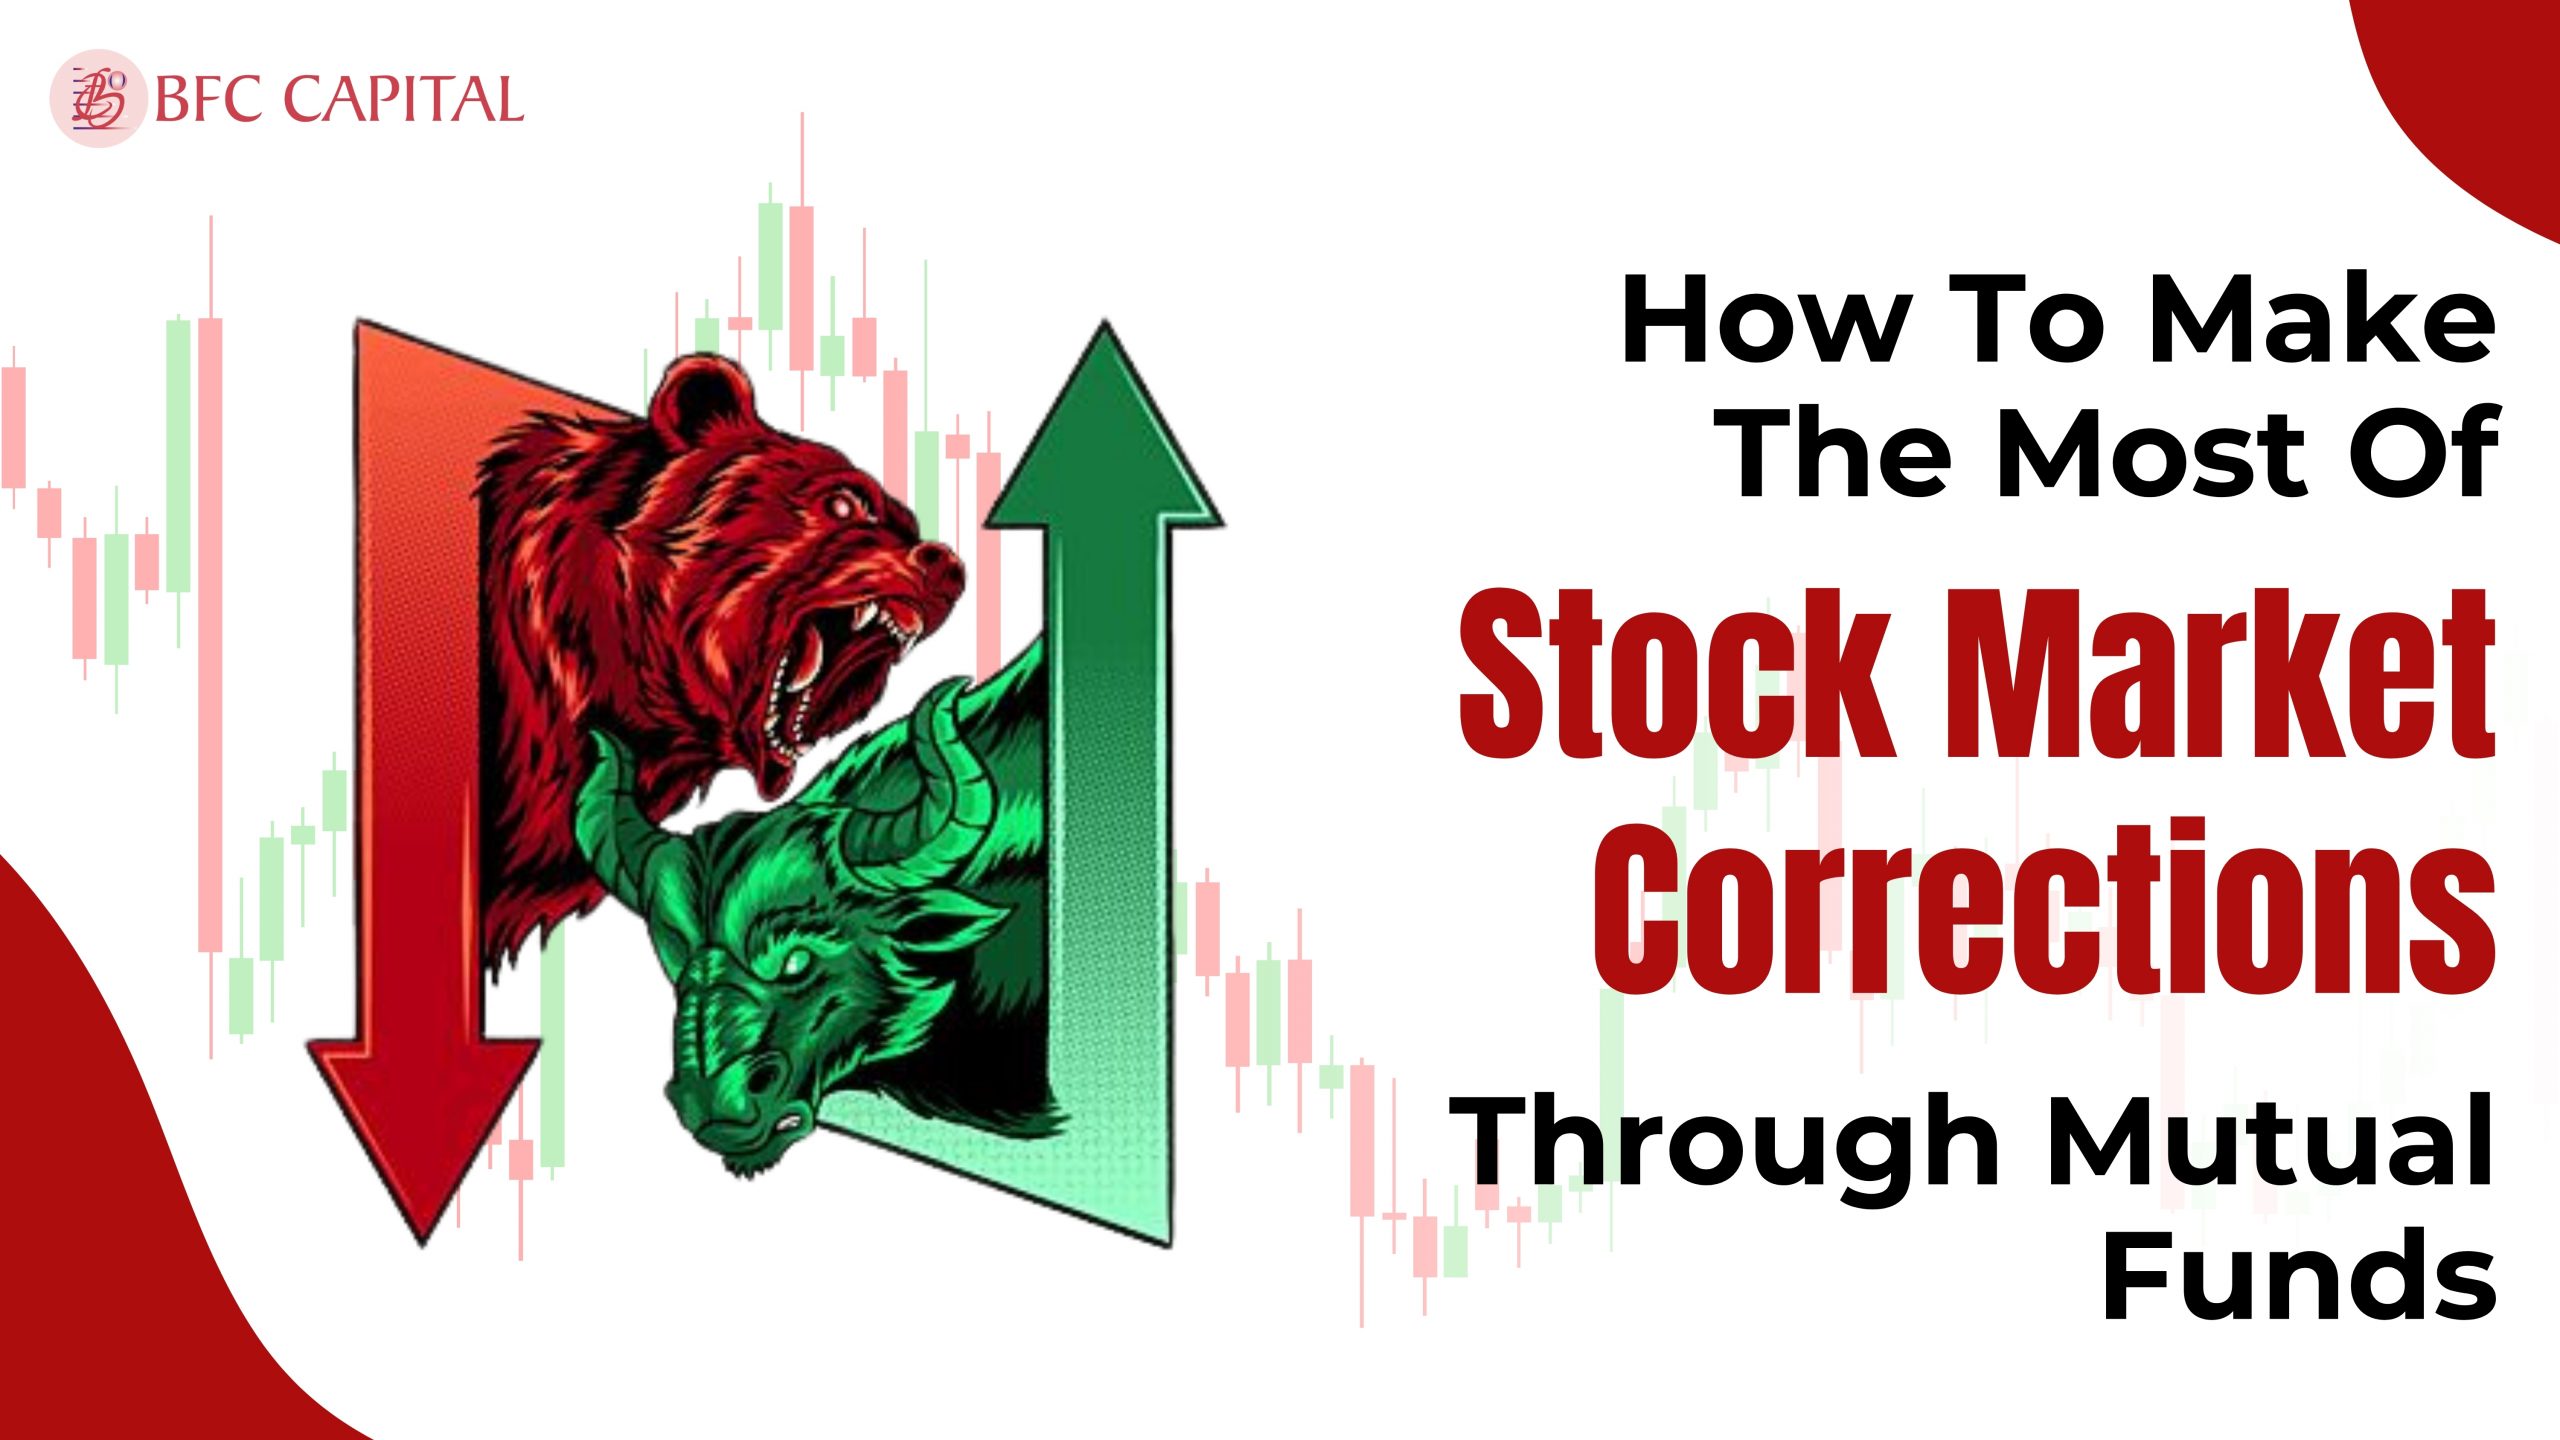 How To Make The Most Of Stock Market Corrections Through Mutual Funds